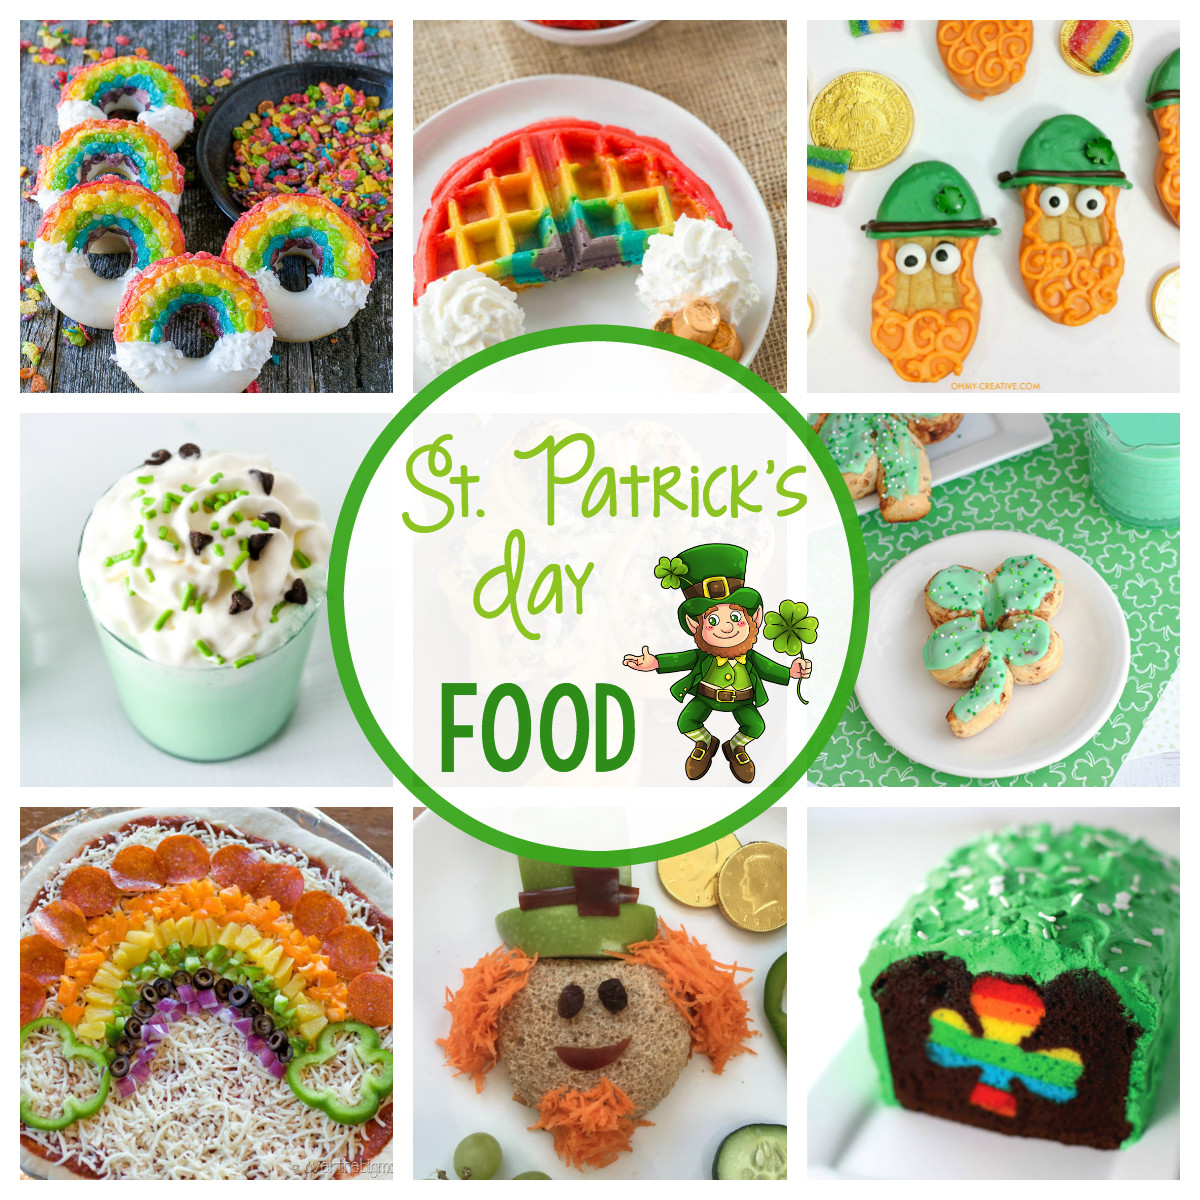 St Patrick's Day Meal Ideas
 17 St Patrick s Day Food Ideas for Kids – Fun Squared